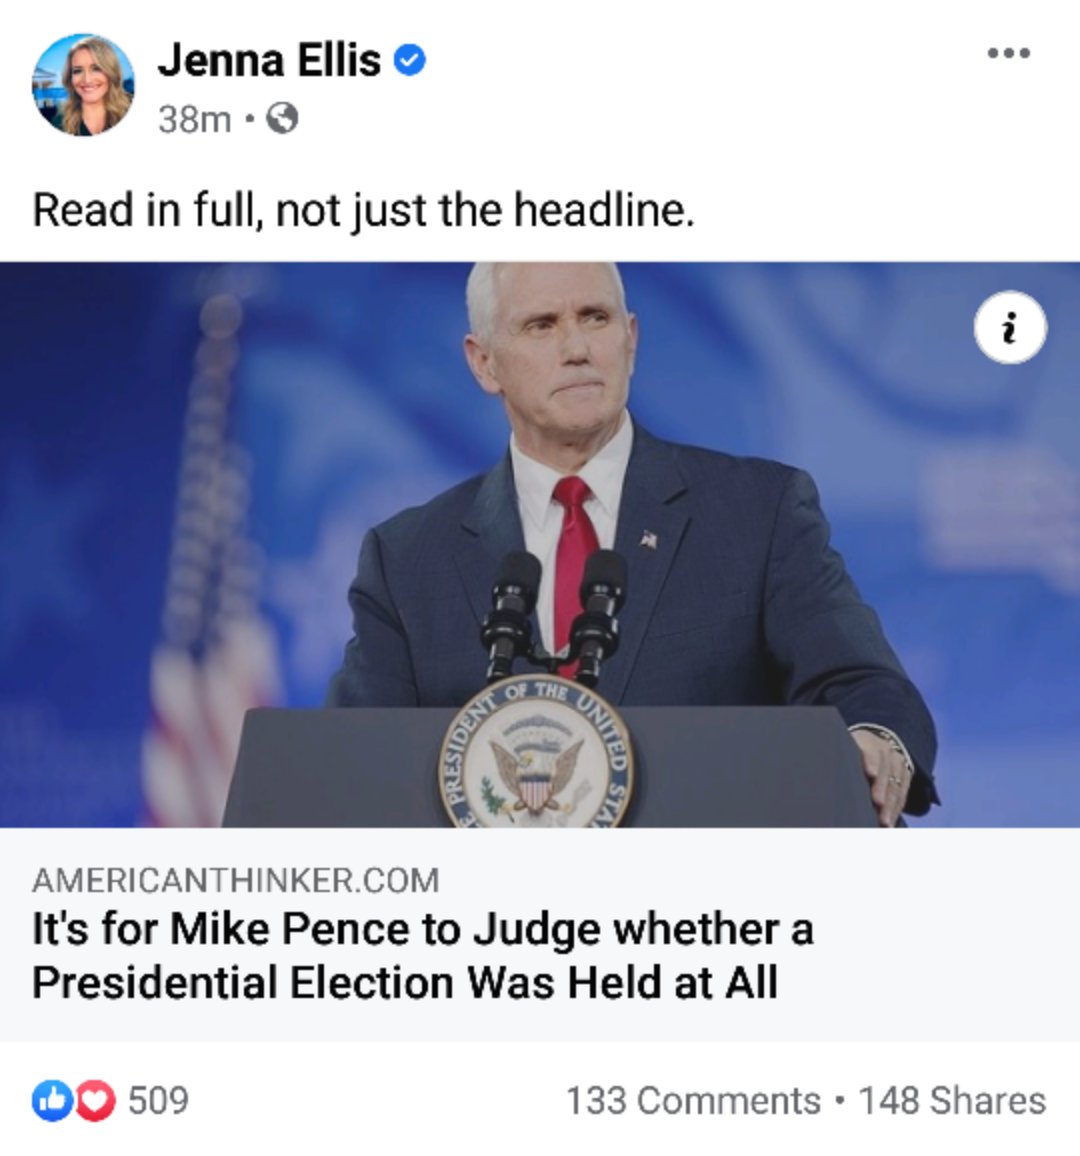  https://www.americanthinker.com/articles/2020/12/its_for_mike_pence_to_judge_whether_a_presidential_election_was_held_at_all.html